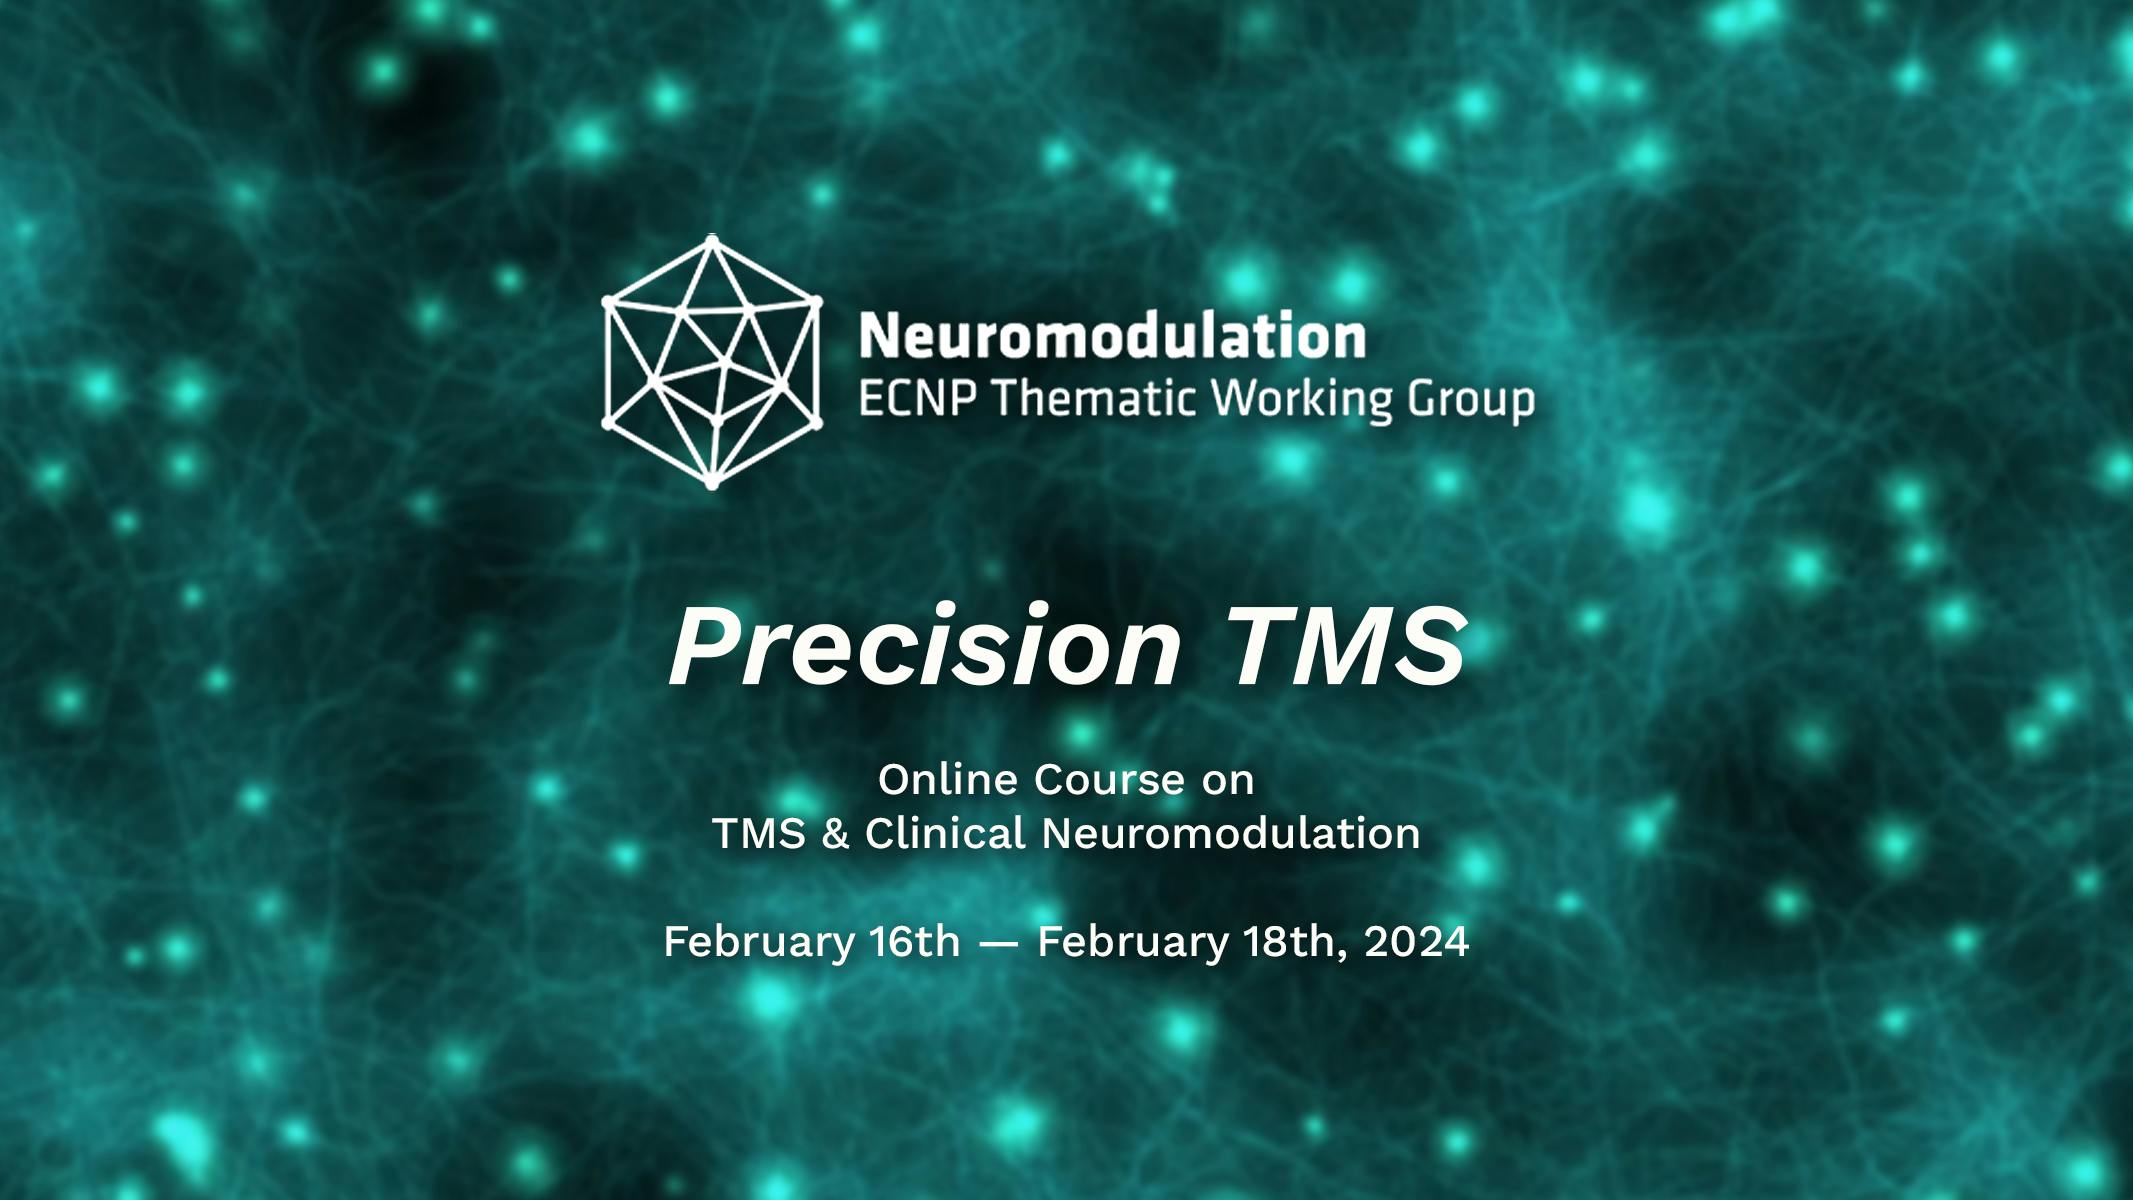 Logos of the Neuromodulation ECNP Thematic Working Group on an image of neuronal networks as a background.